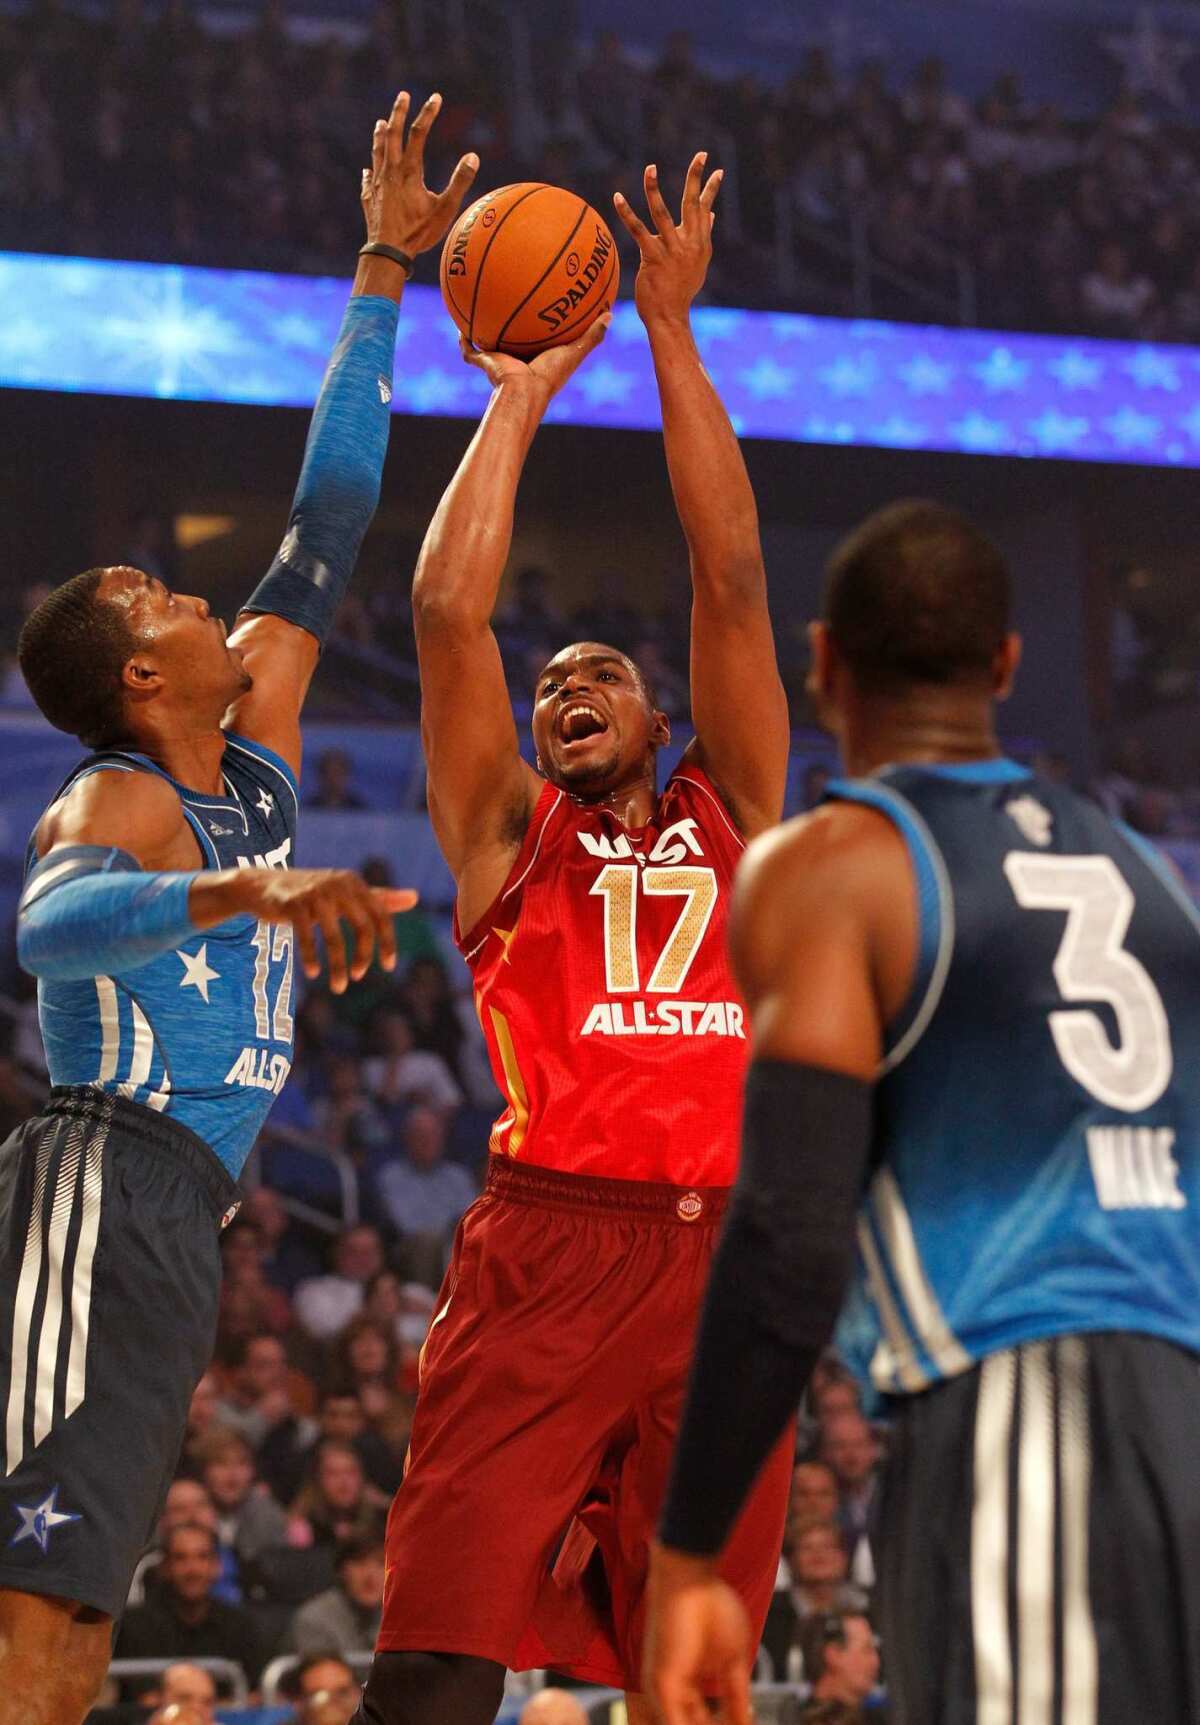 Lakers center Andrew Bynum missed three early shots in the NBA All-Star game on Sunday in Orlando. He played five minutes before sitting out the rest of the game with a sore knee.